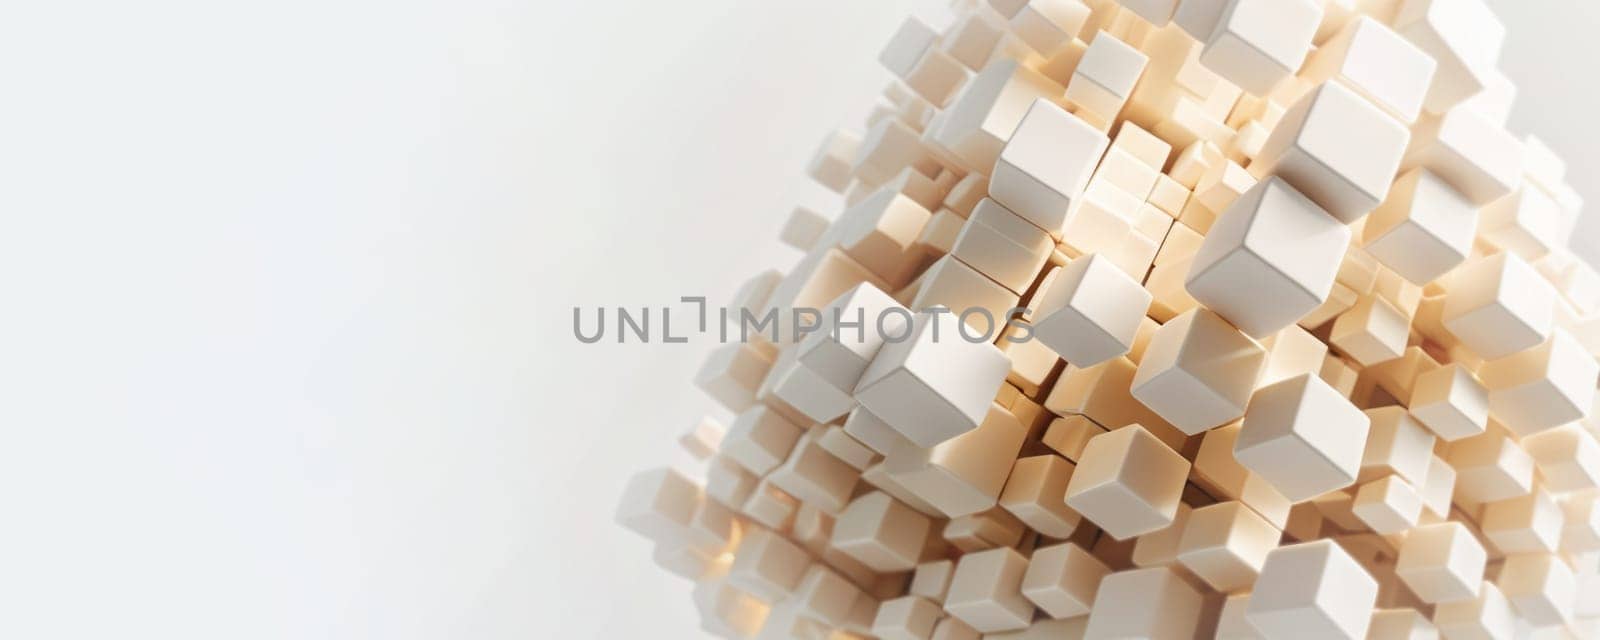 The image displays a cluster of white and beige cubes, forming an abstract 3D shape. The cubes of varying sizes appear to be floating or connected, illuminated from the top left corner, casting soft shadows and highlights on the surfaces. The minimalist aesthetic is emphasized by the white background. Generative AI